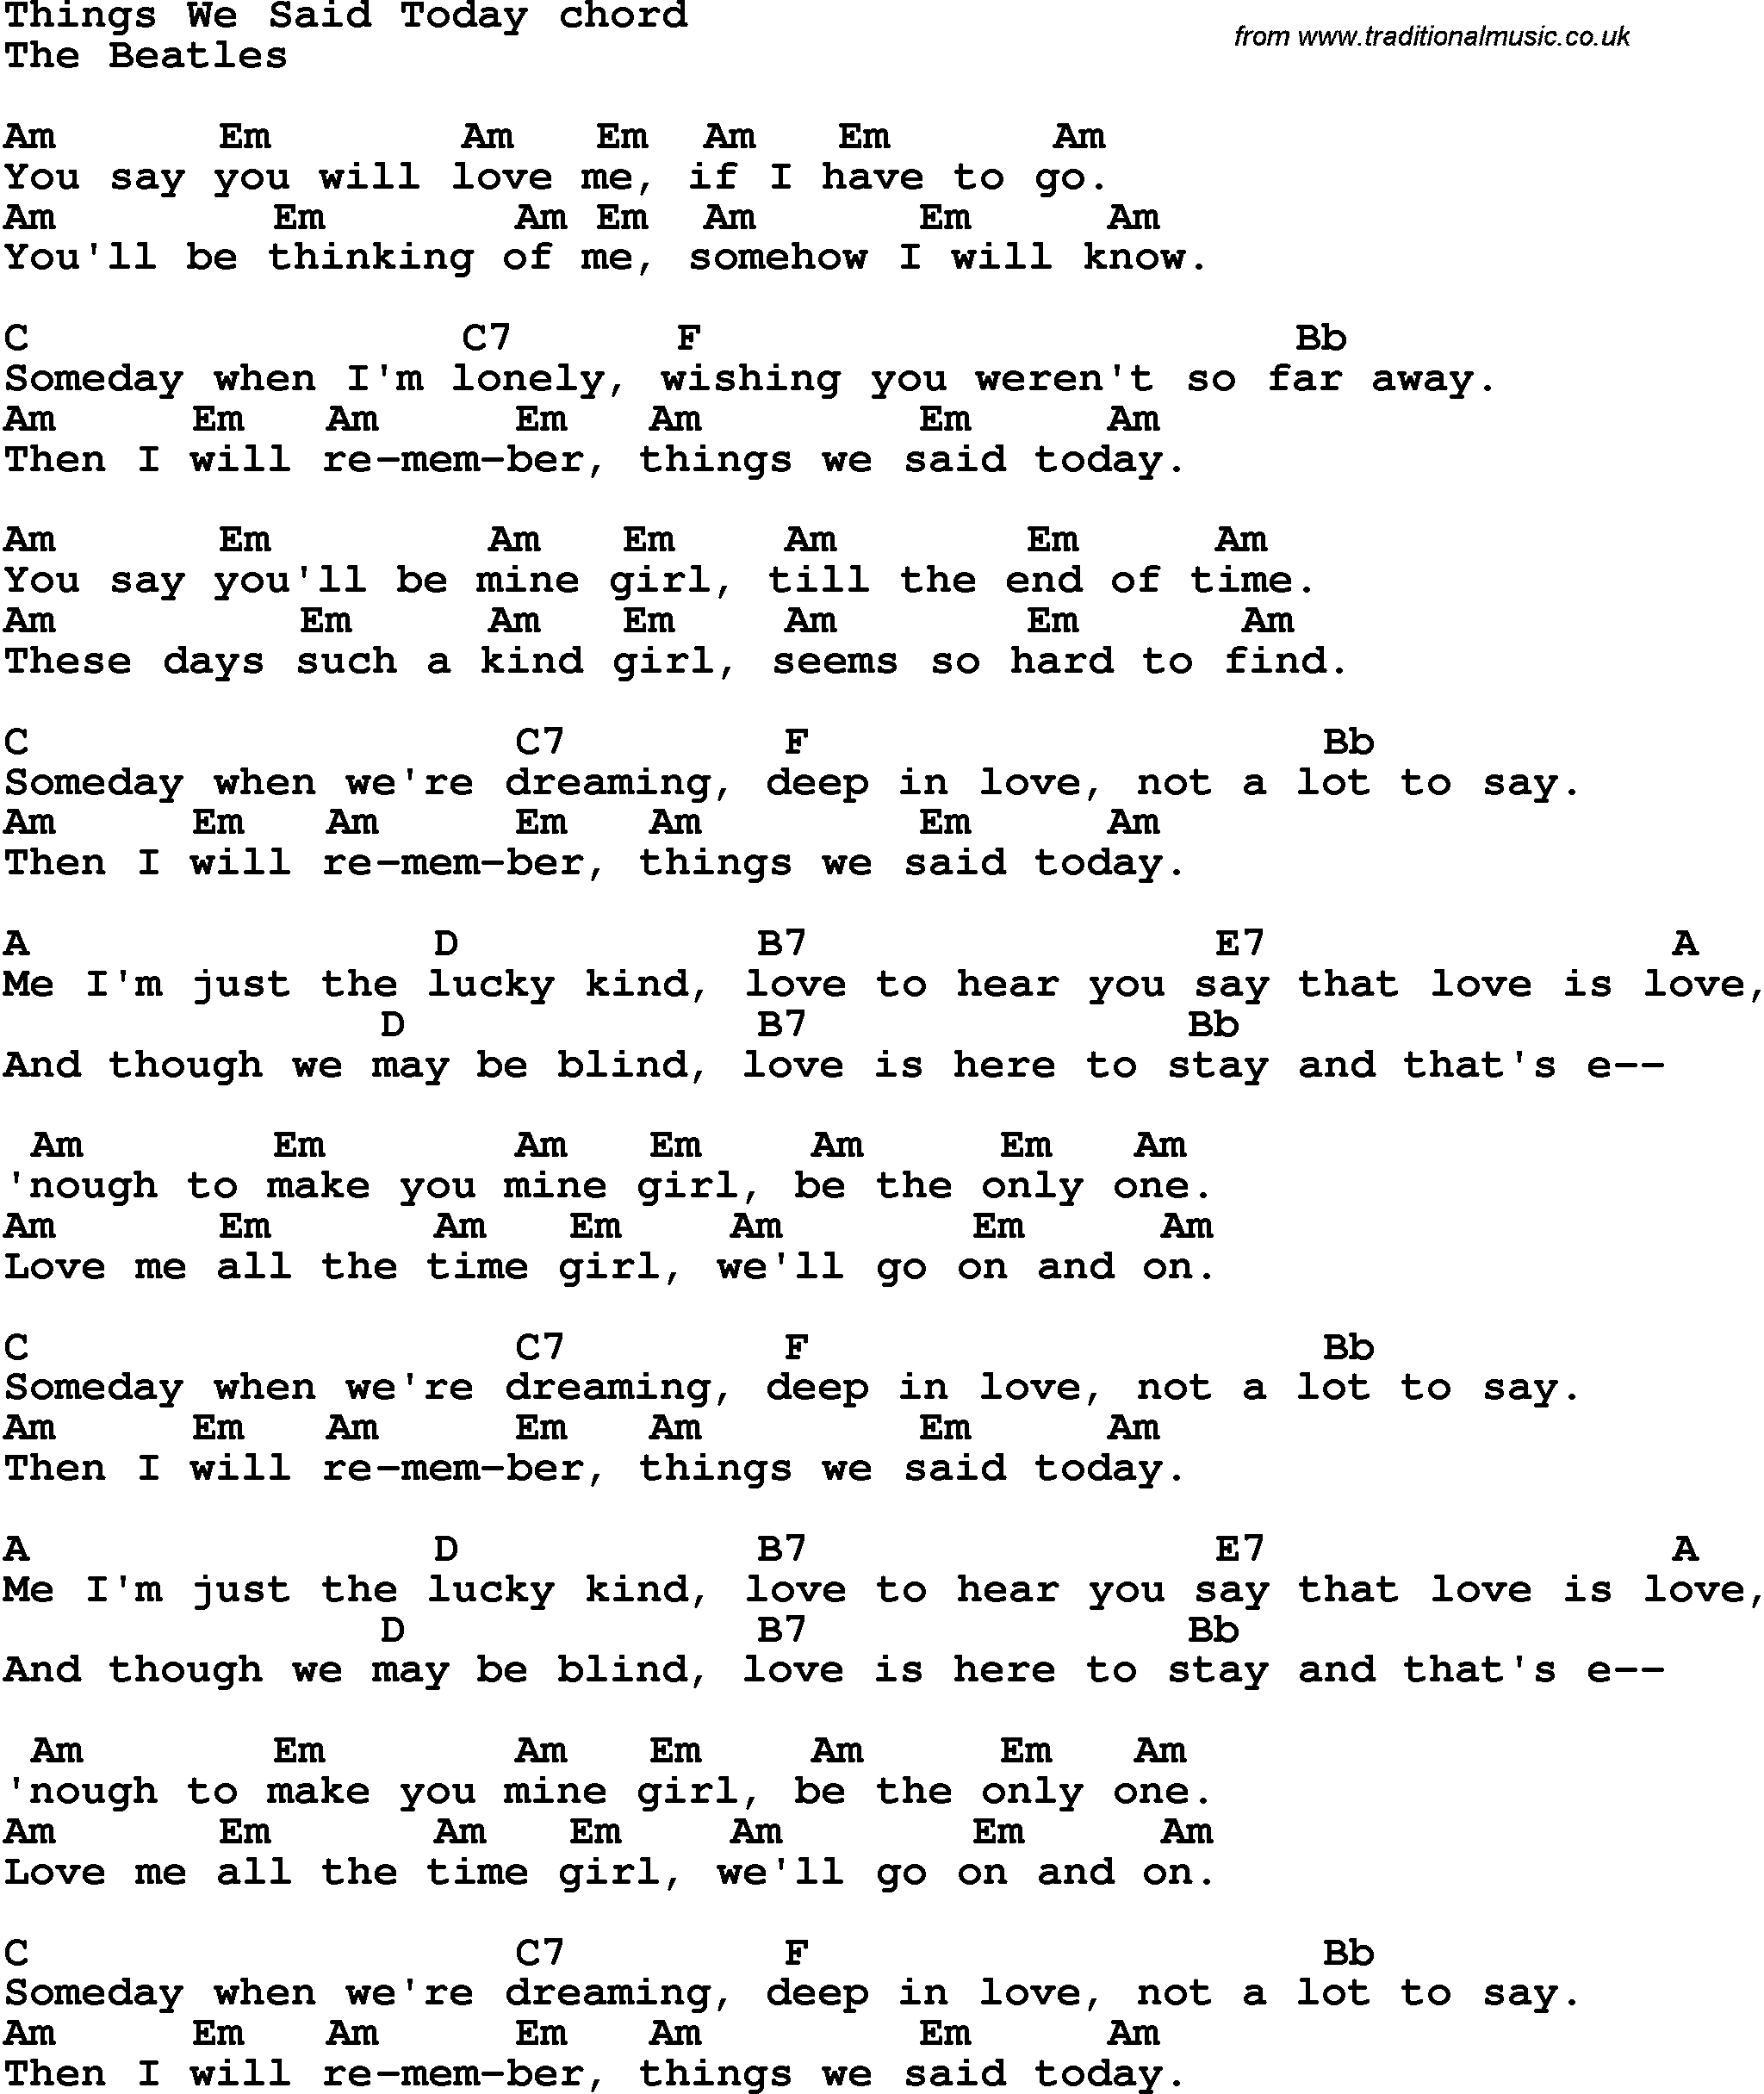 Song Lyrics with guitar chords for Things We Said Today